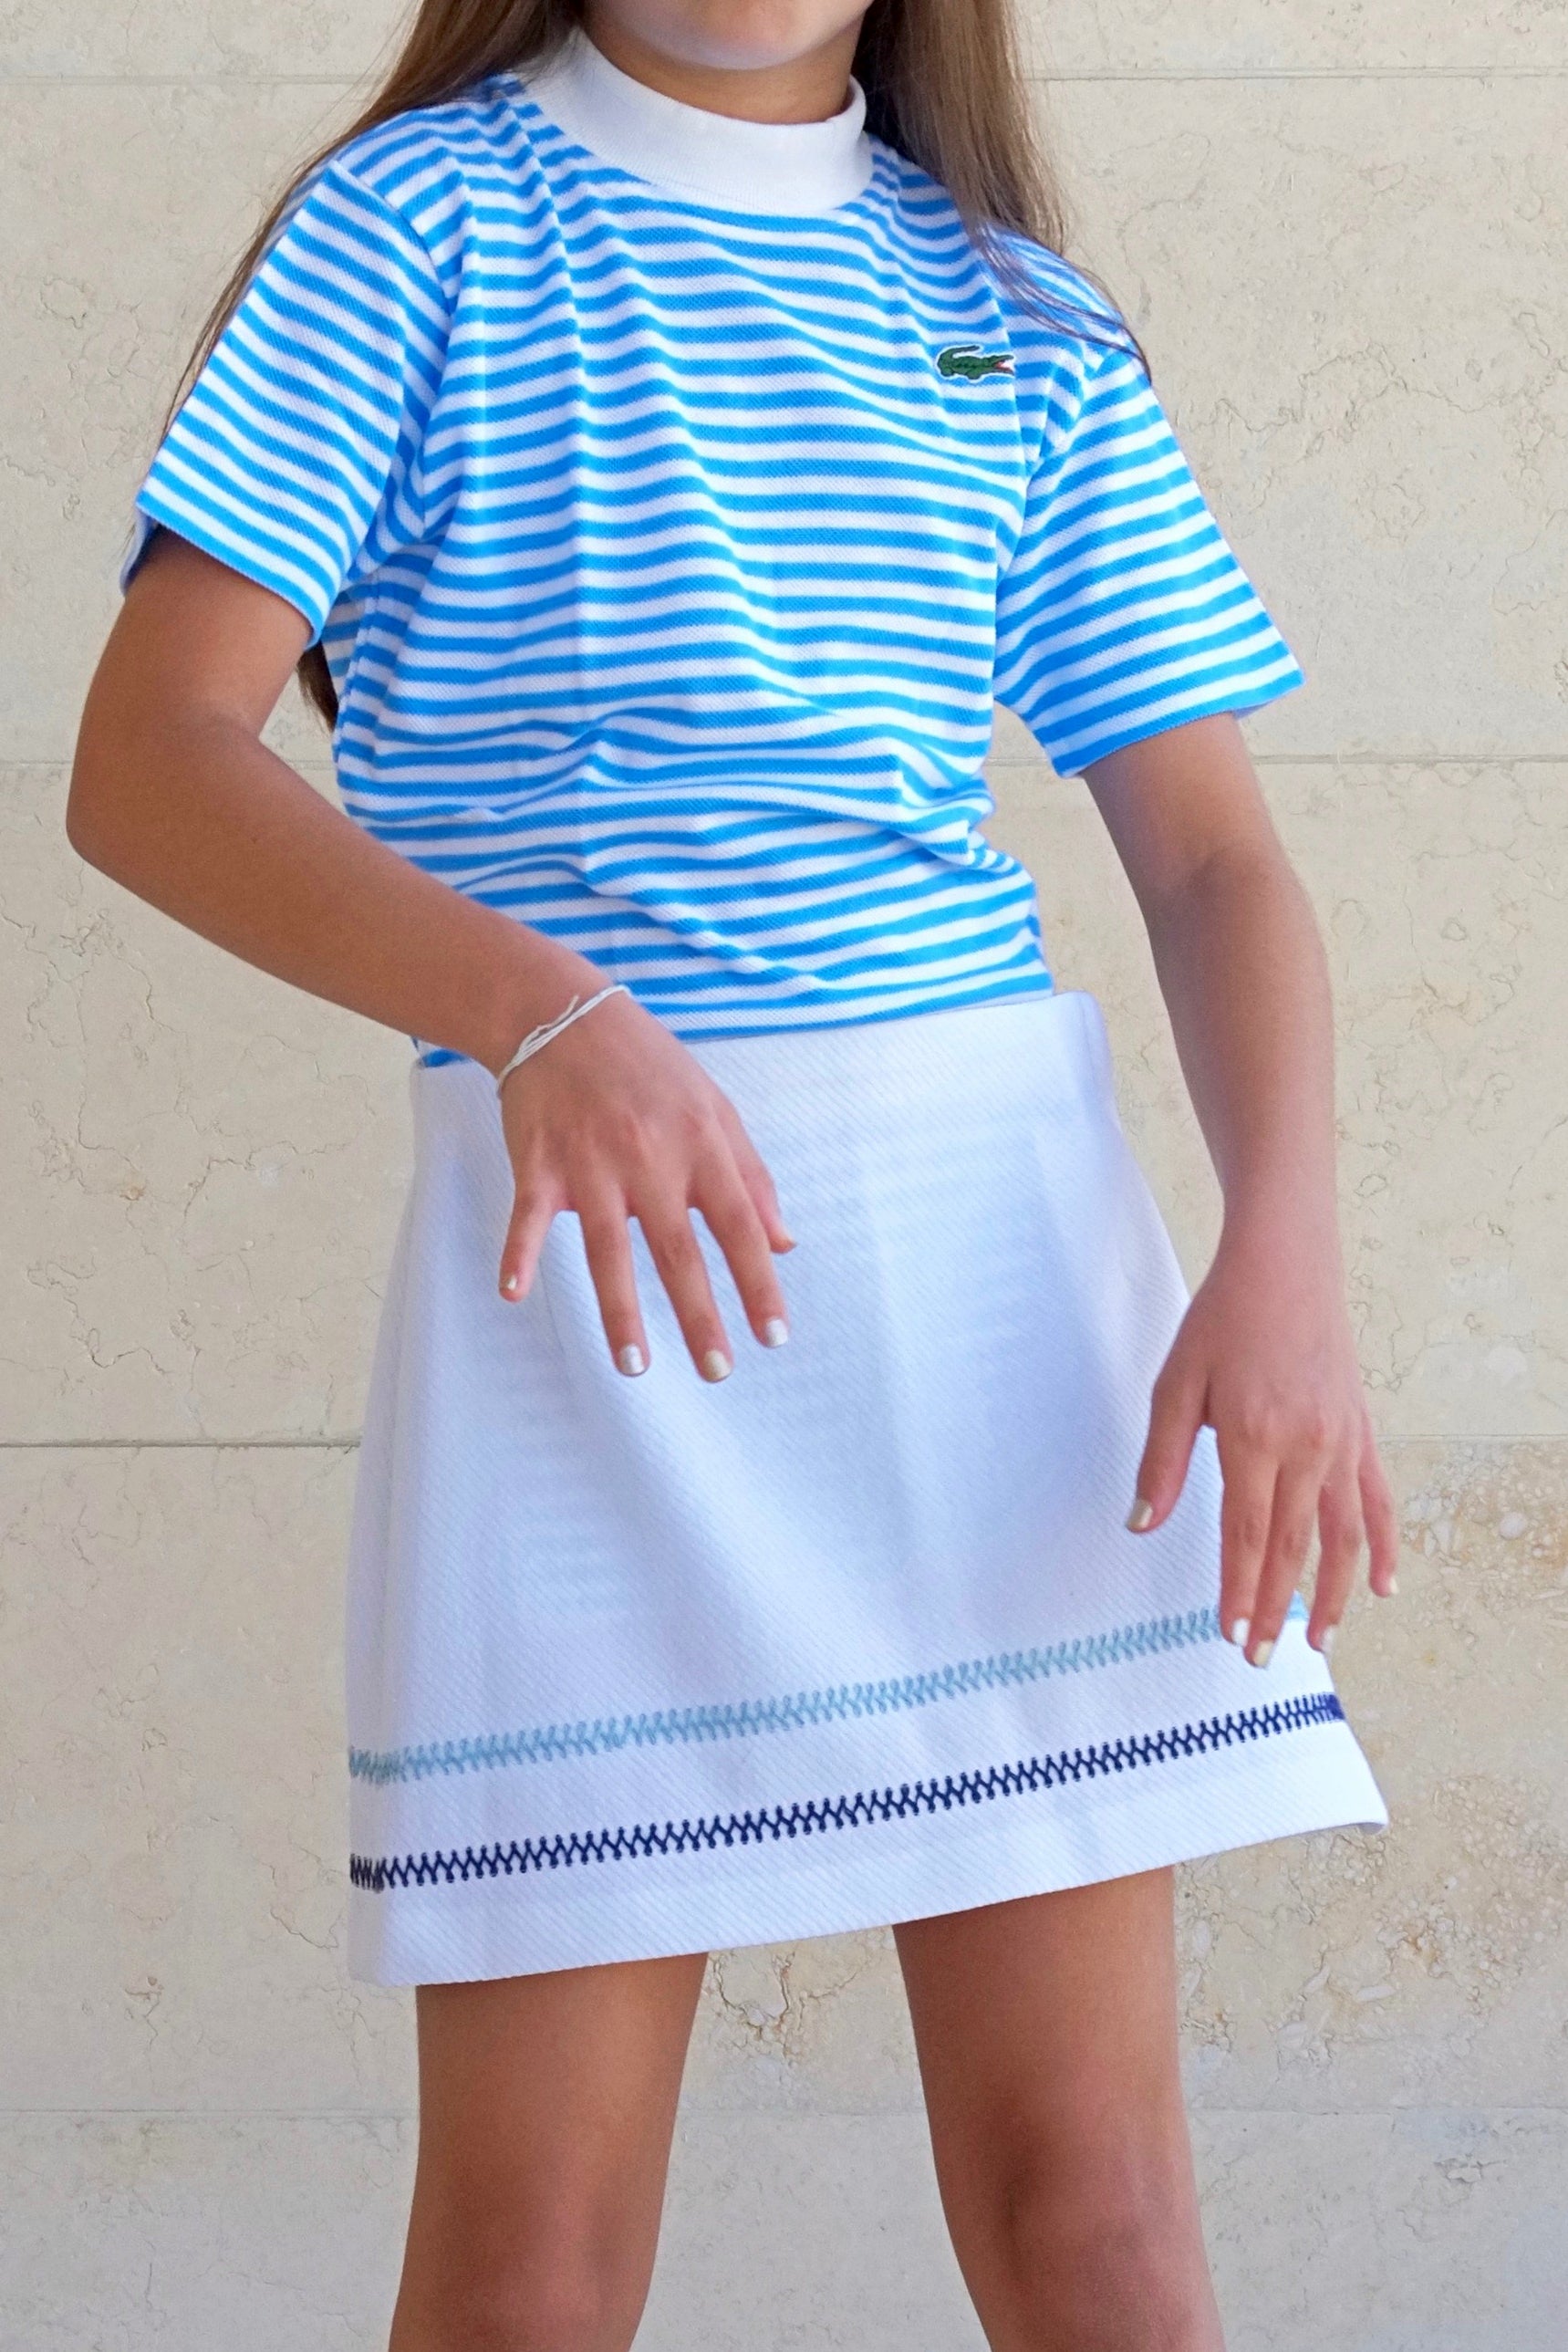 LACOSTE Striped Shirt in blue and white stripes worn by a girl in a white skirt